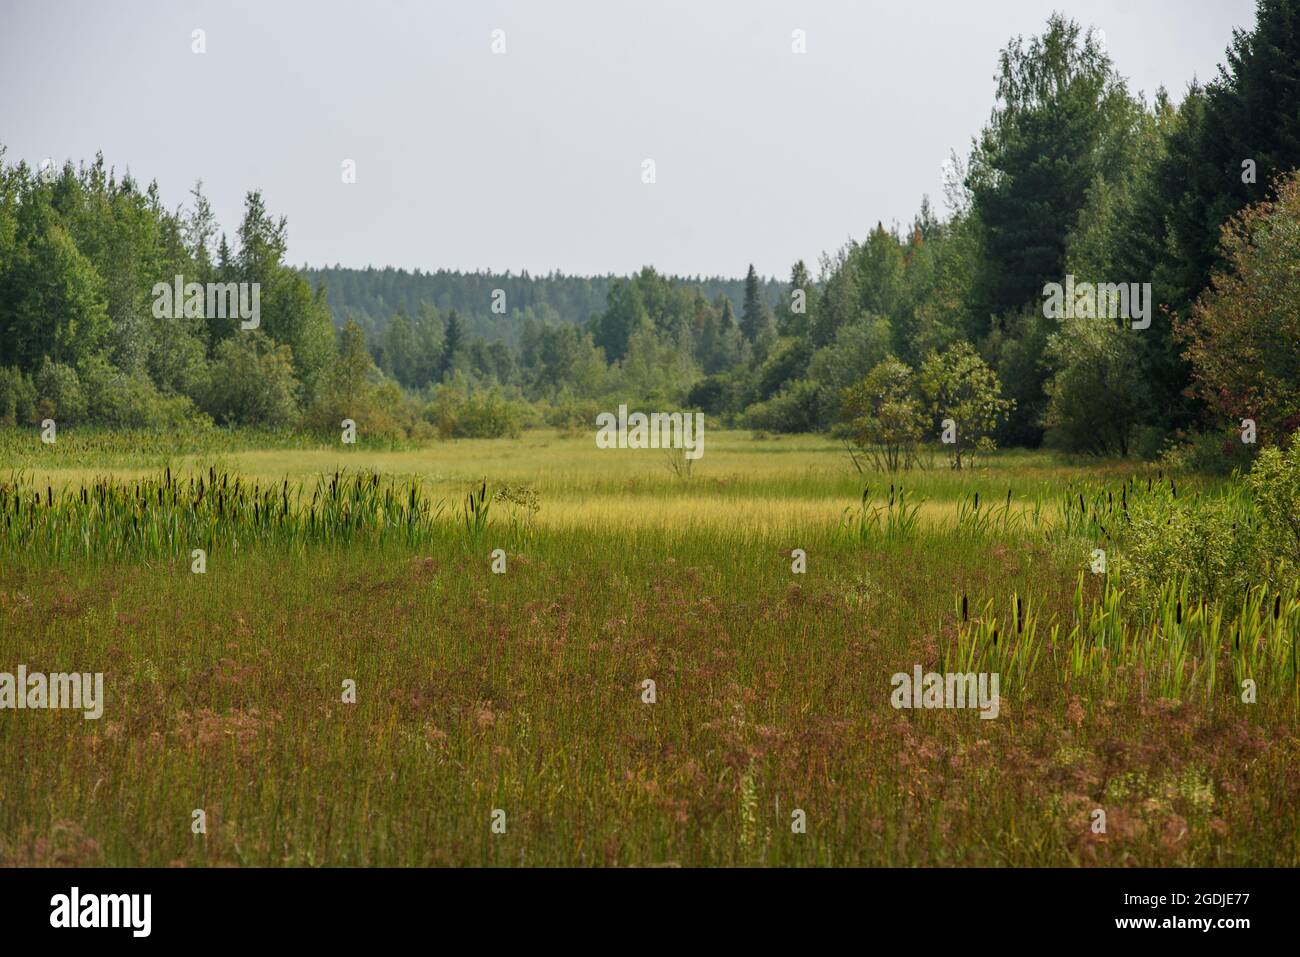 Reeds on a swampy area in tall grass. Stock Photo